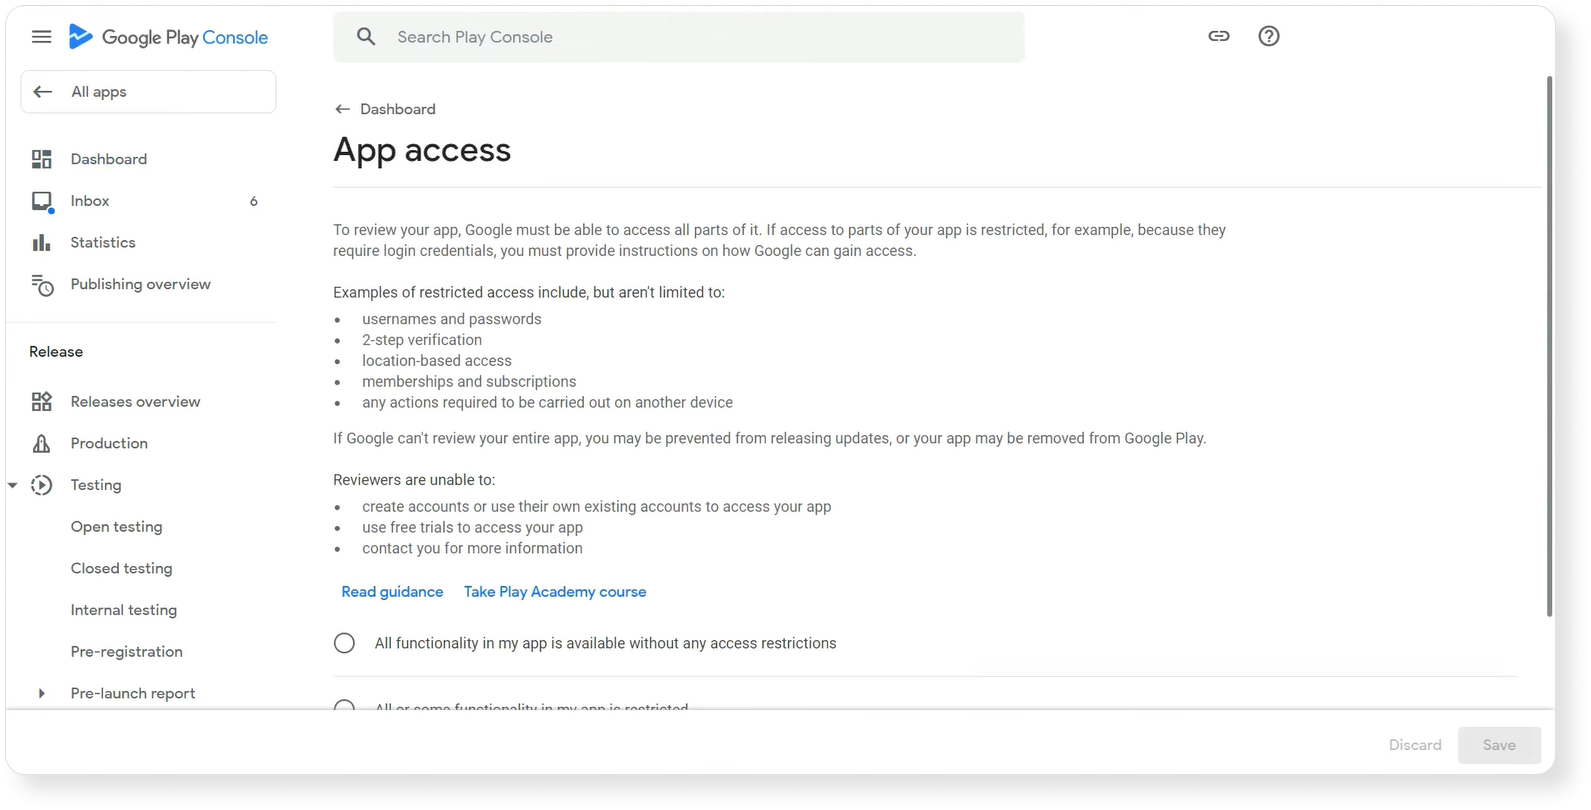 Giving Google access to your app